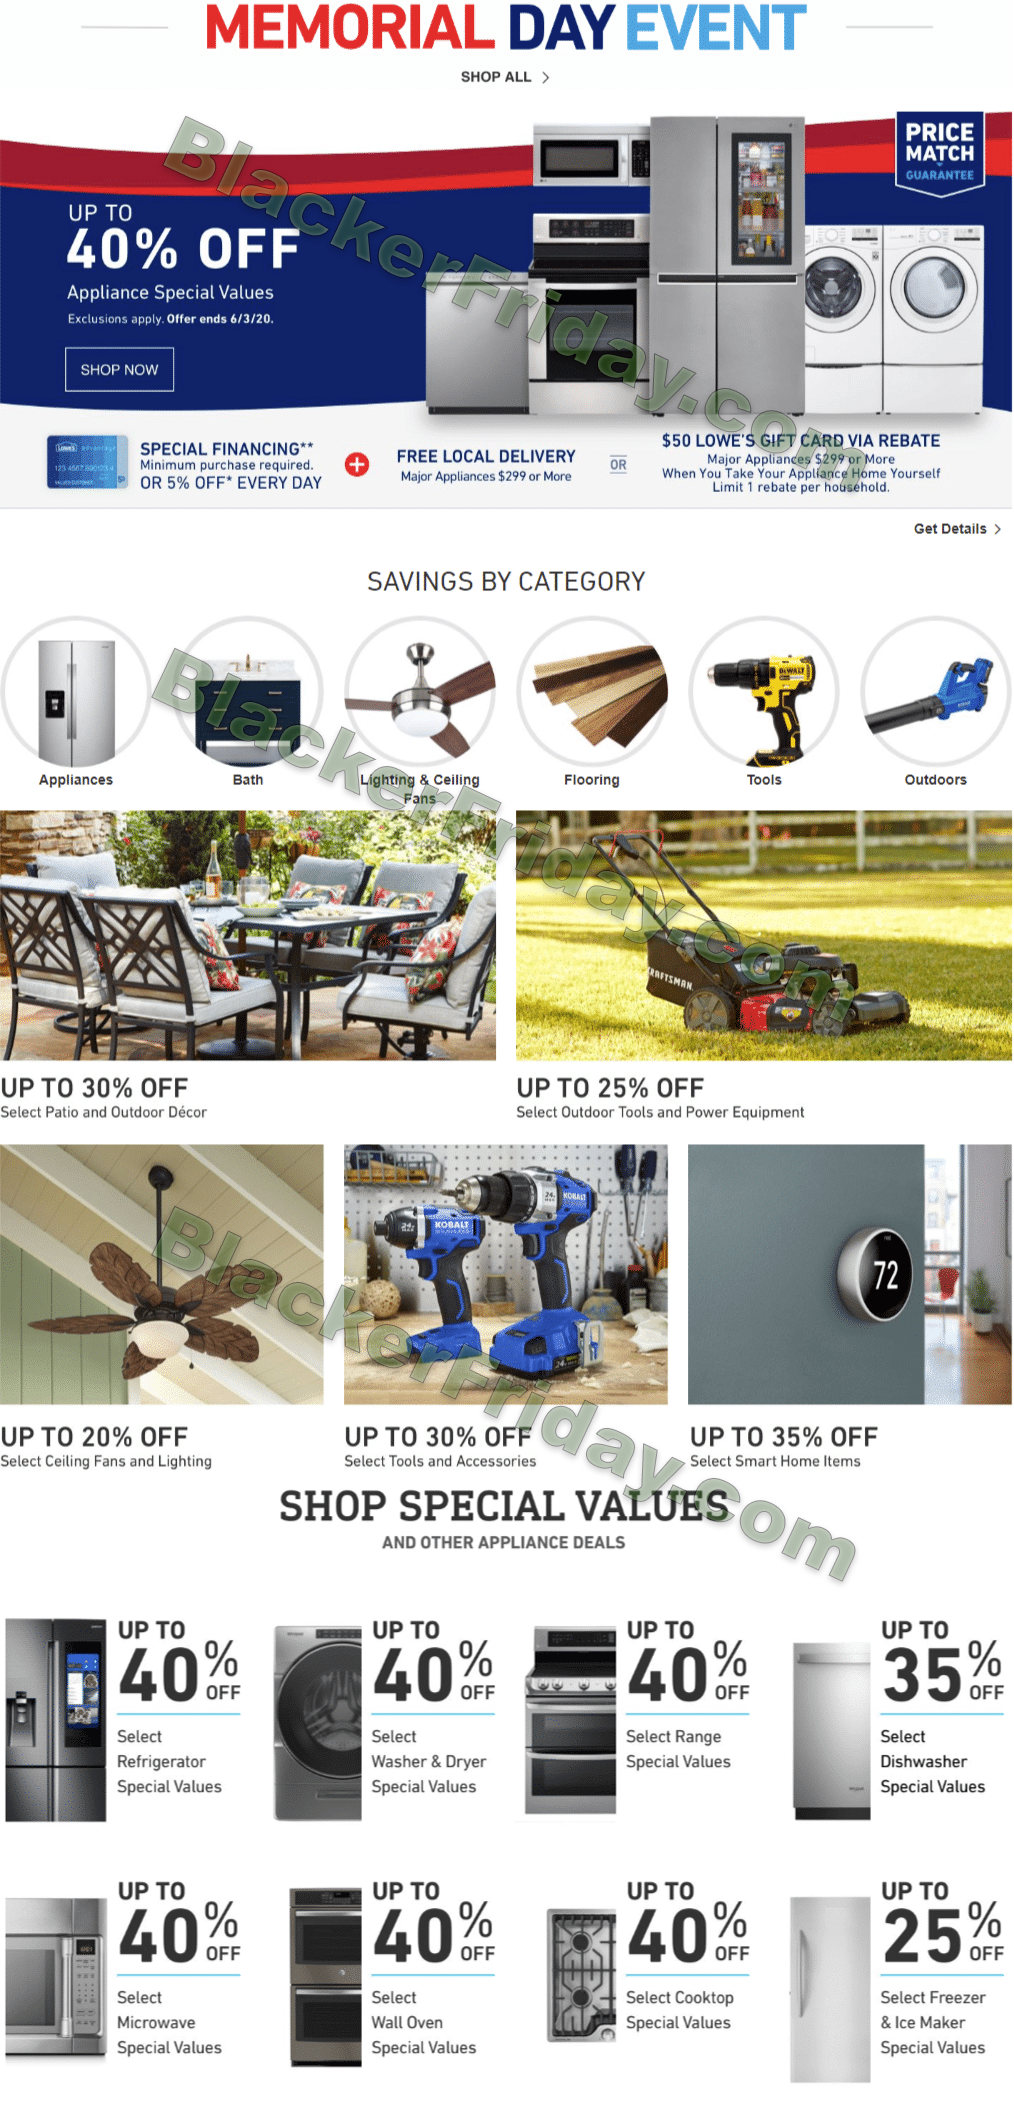 Lowe's Memorial Day Sale 2021 What to Expect Blacker Friday